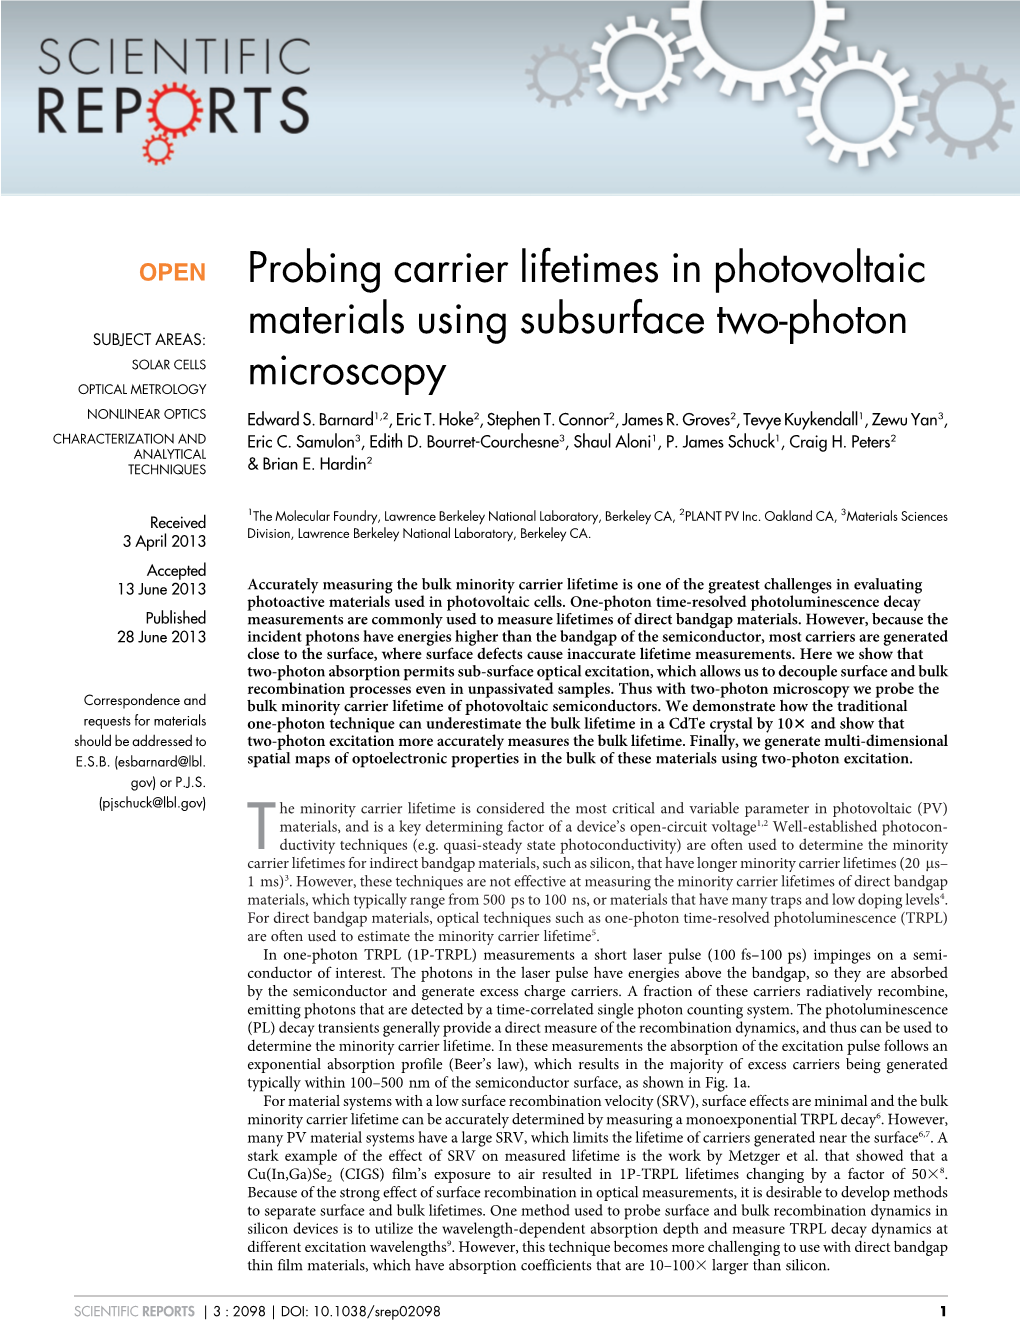 Probing Carrier Lifetimes in Photovoltaic Materials Using Subsurface Two-Photon Microscopy